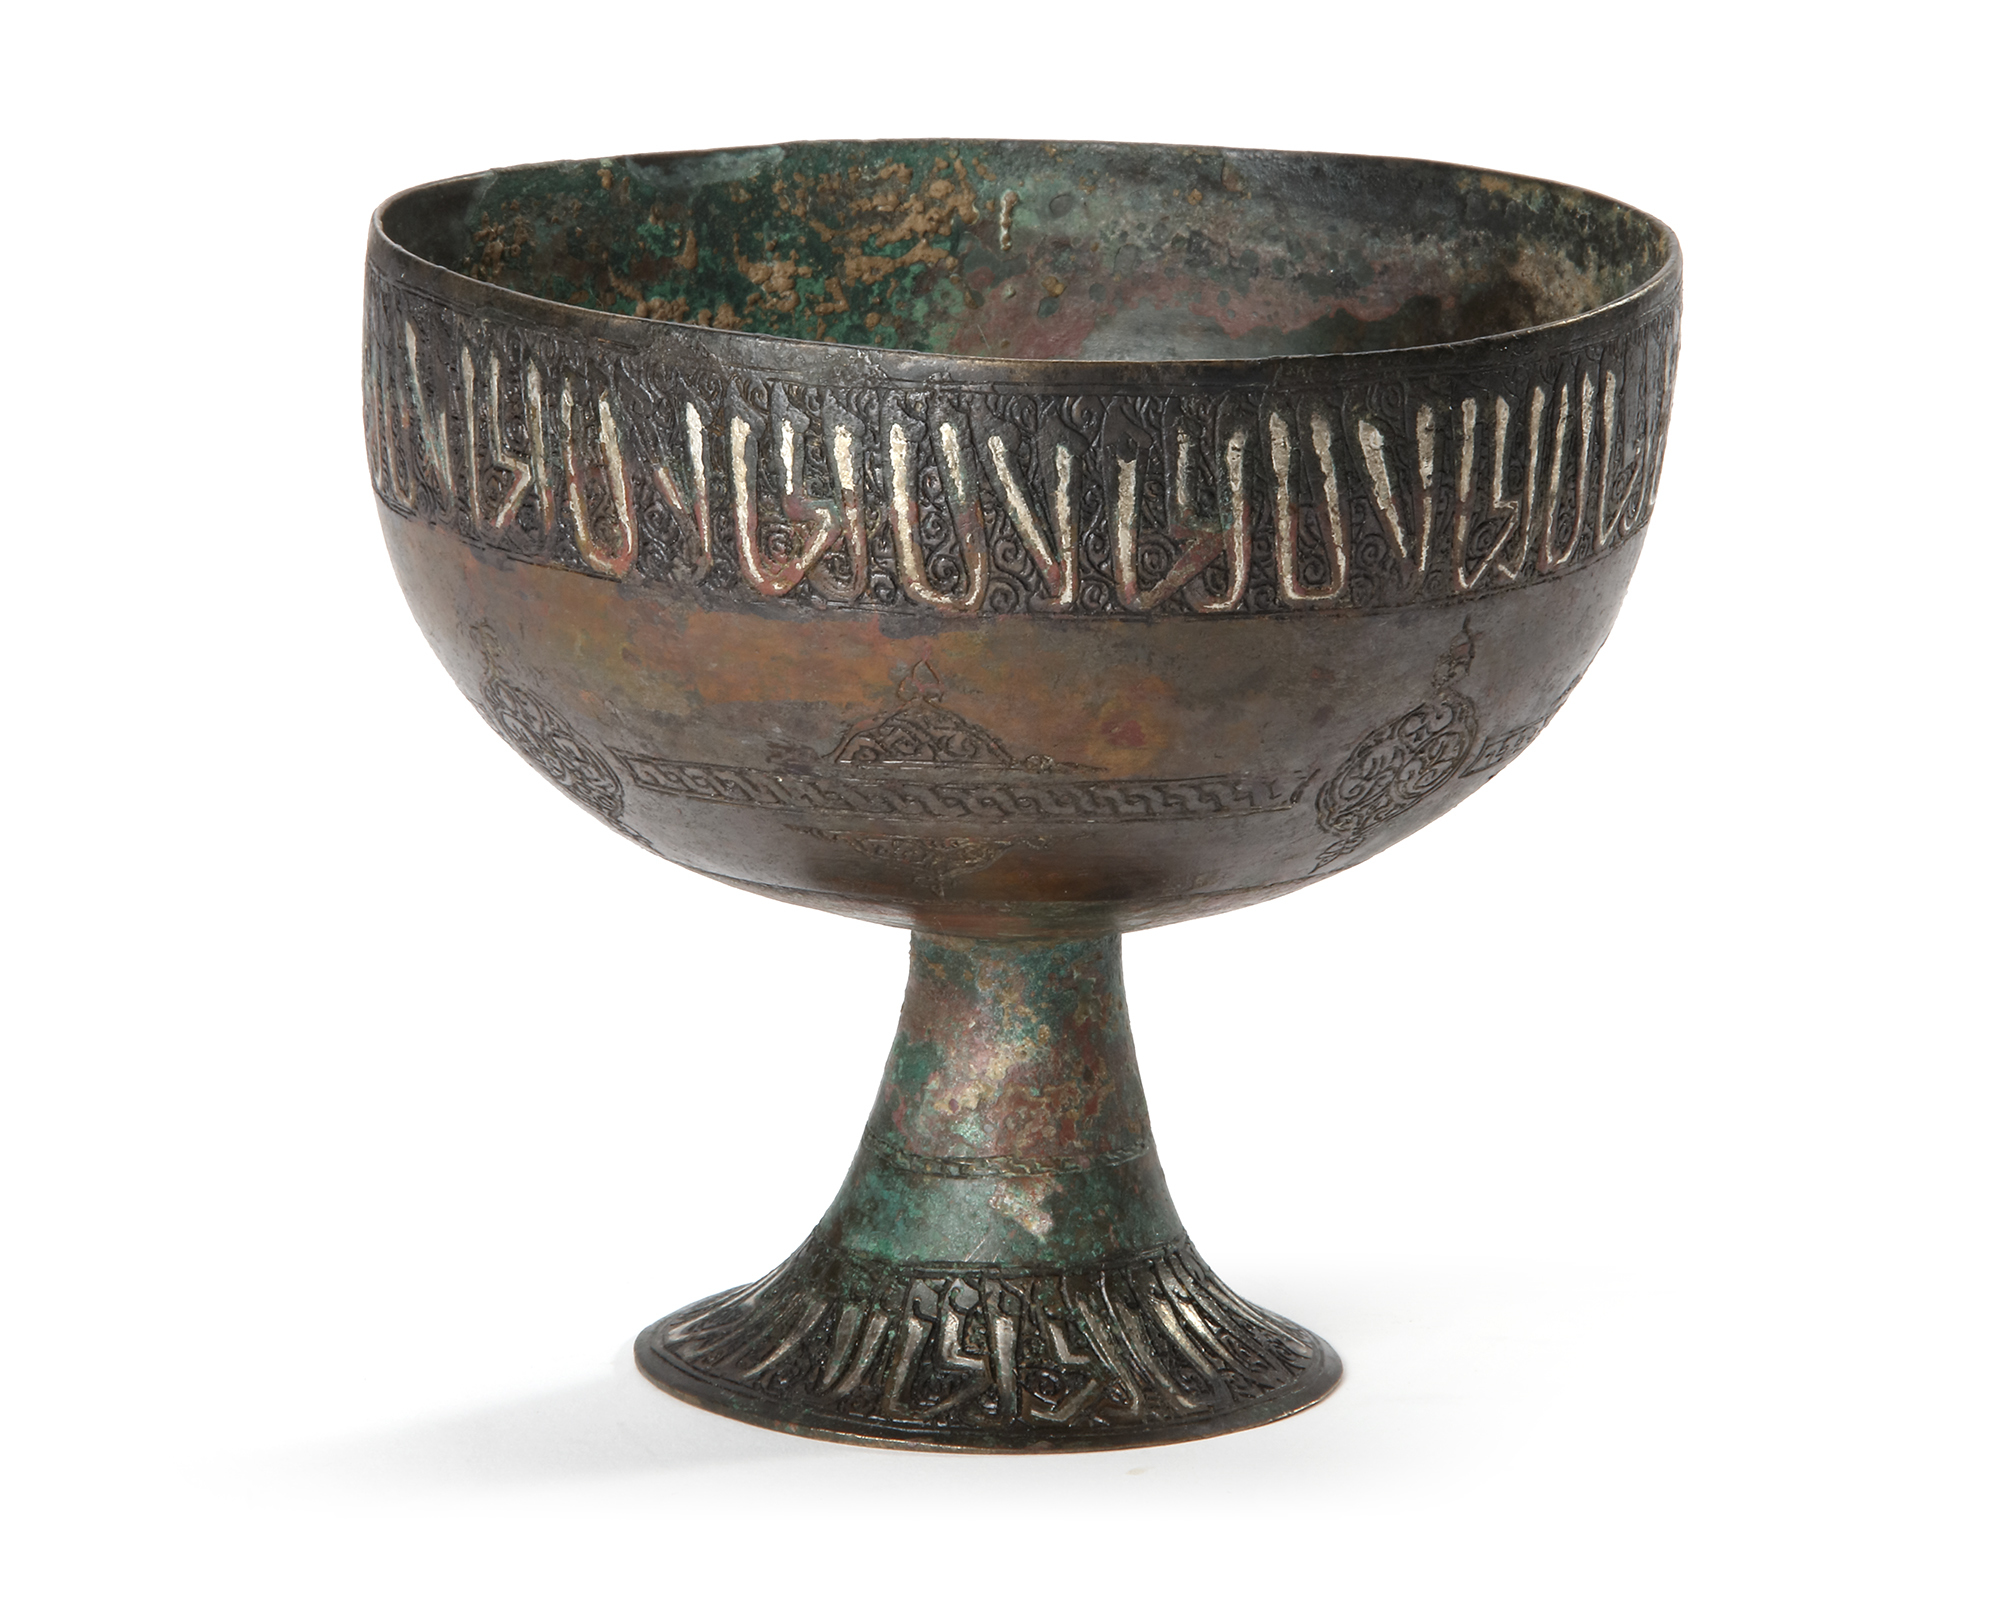 A SILVER-INLAID BRONZE FOOTED BOWL, PERSIA KHORASSAN, 12TH-13TH CENTURY - Image 3 of 6